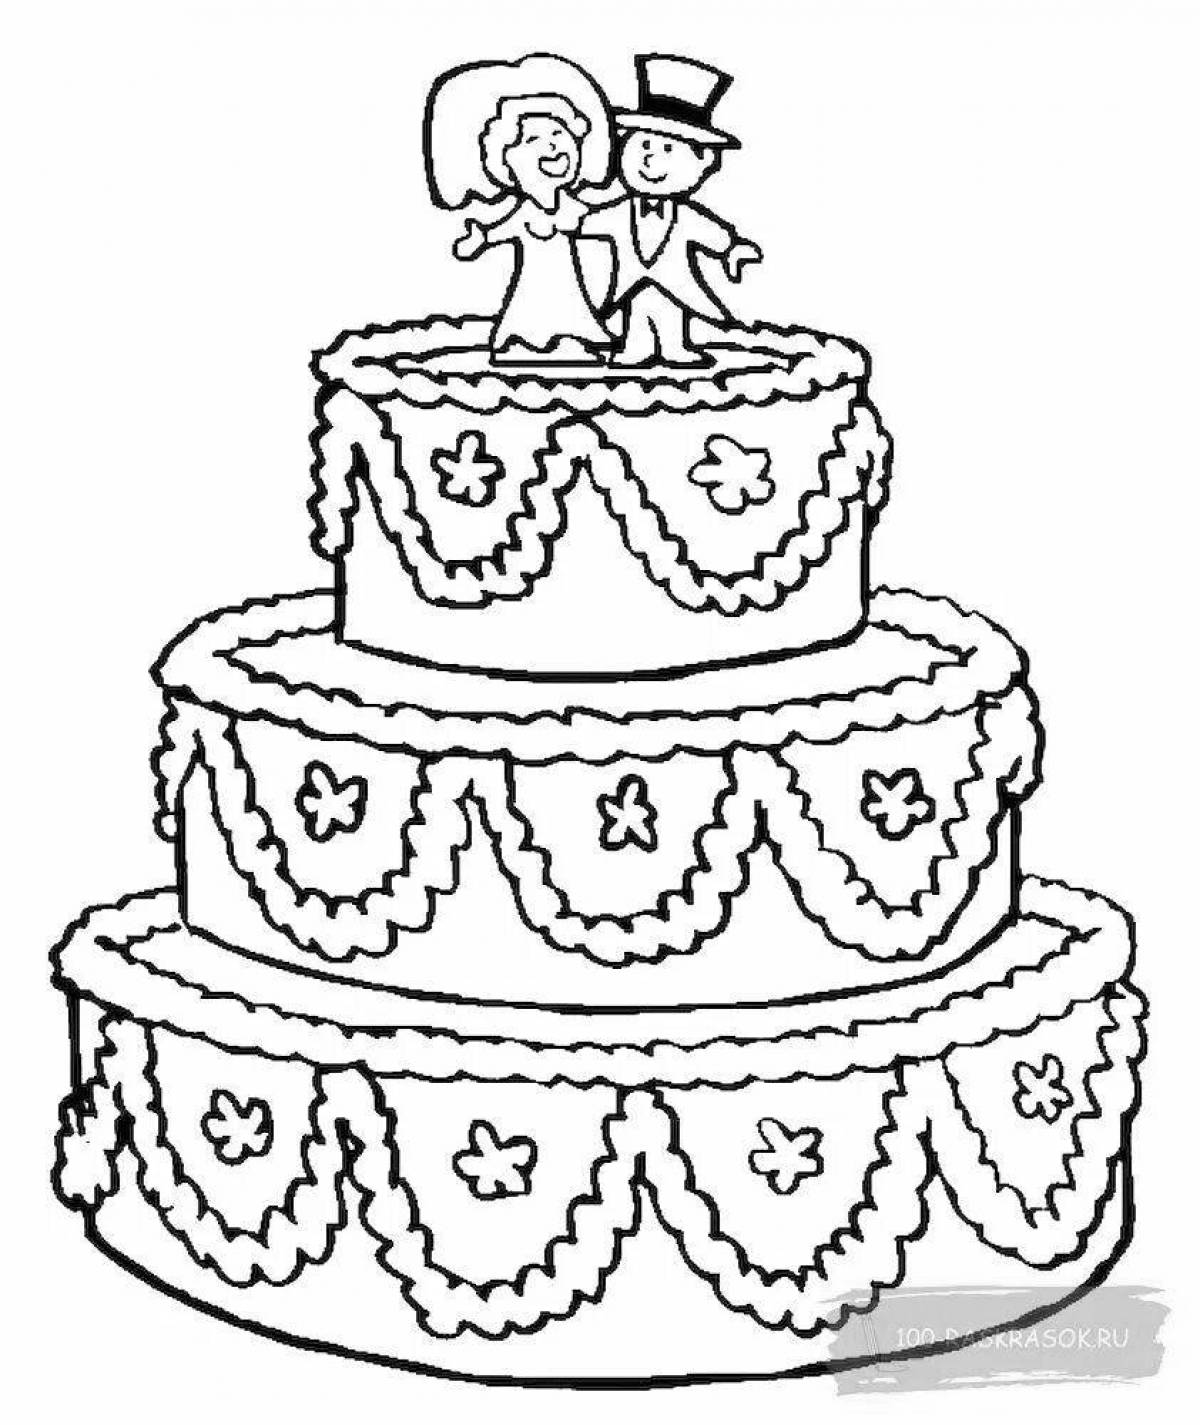 Playful cake coloring page for kids